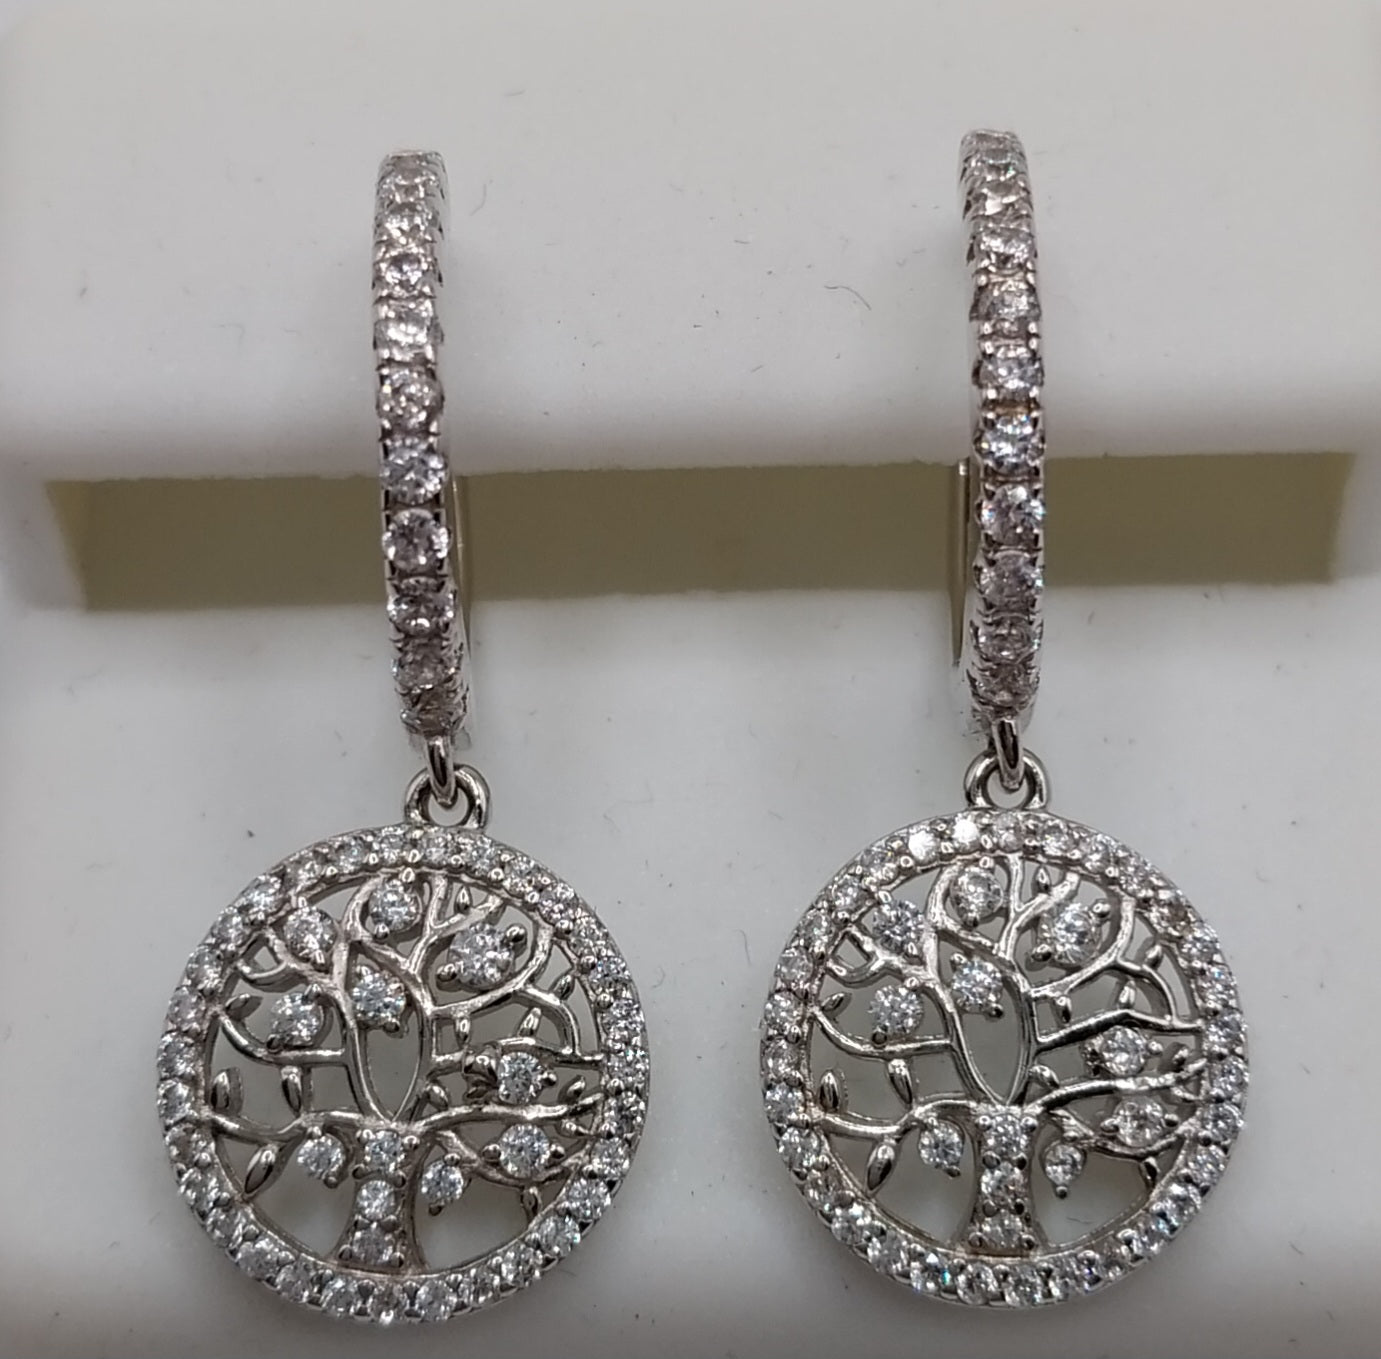 Tree of life Silver 925 Dangling Earrings with Cubic Zirconias